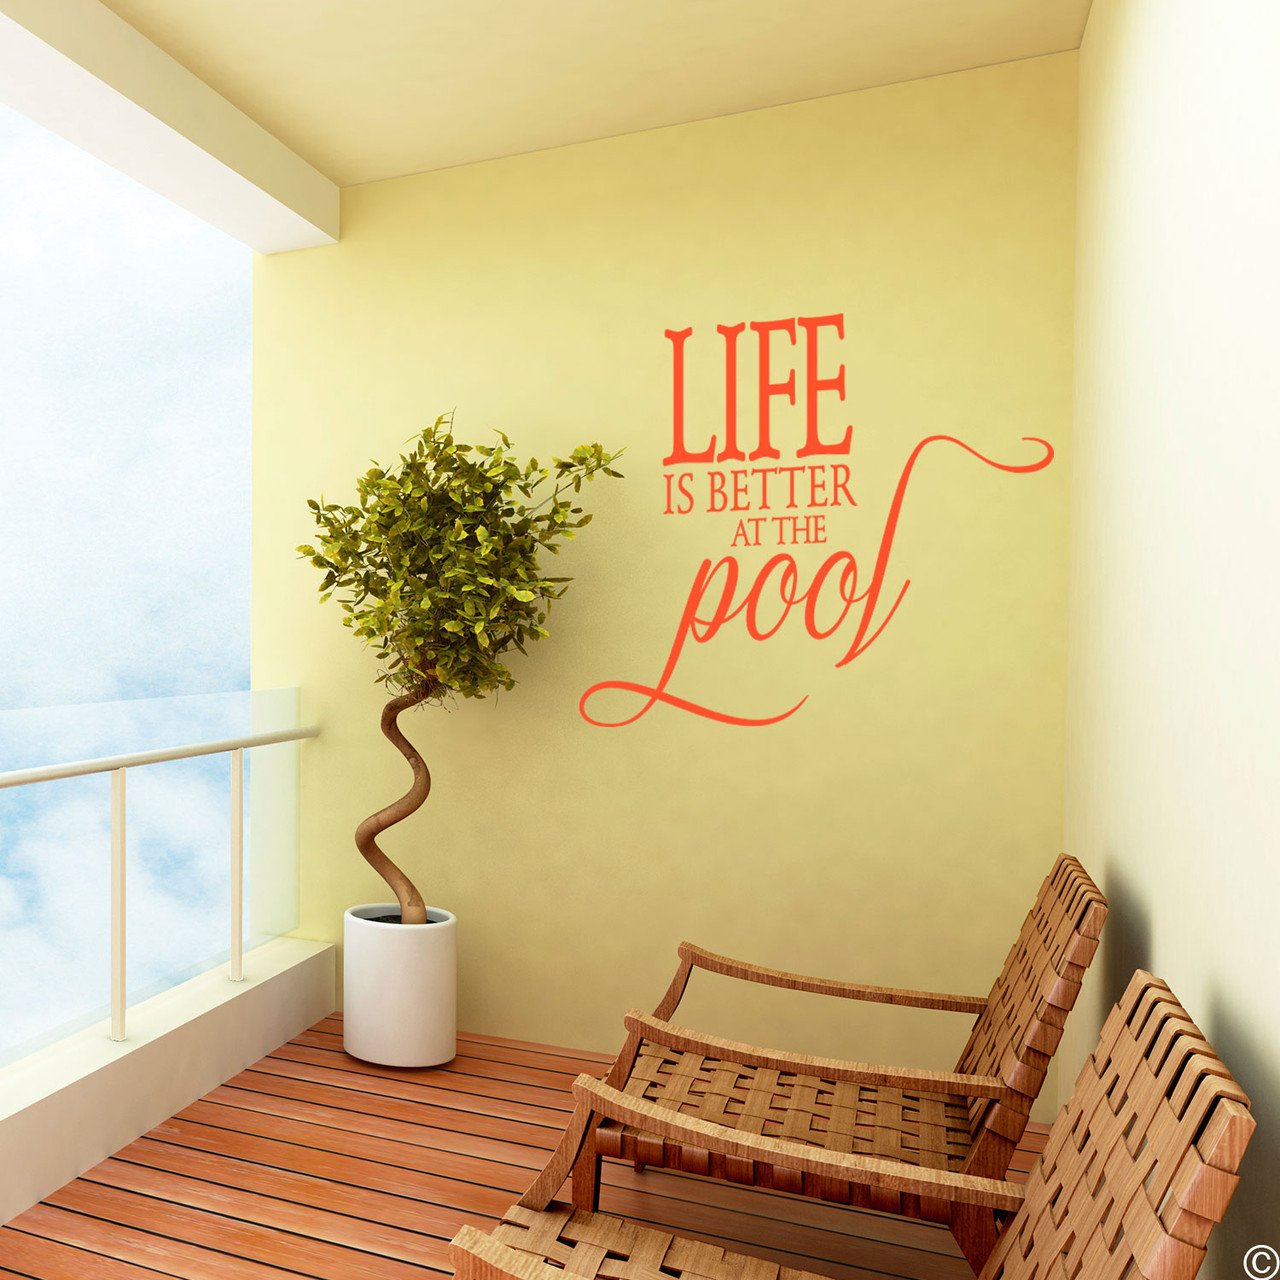 The Life is better at the Pool wall decal, on a balcony wall in the orange vinyl color.